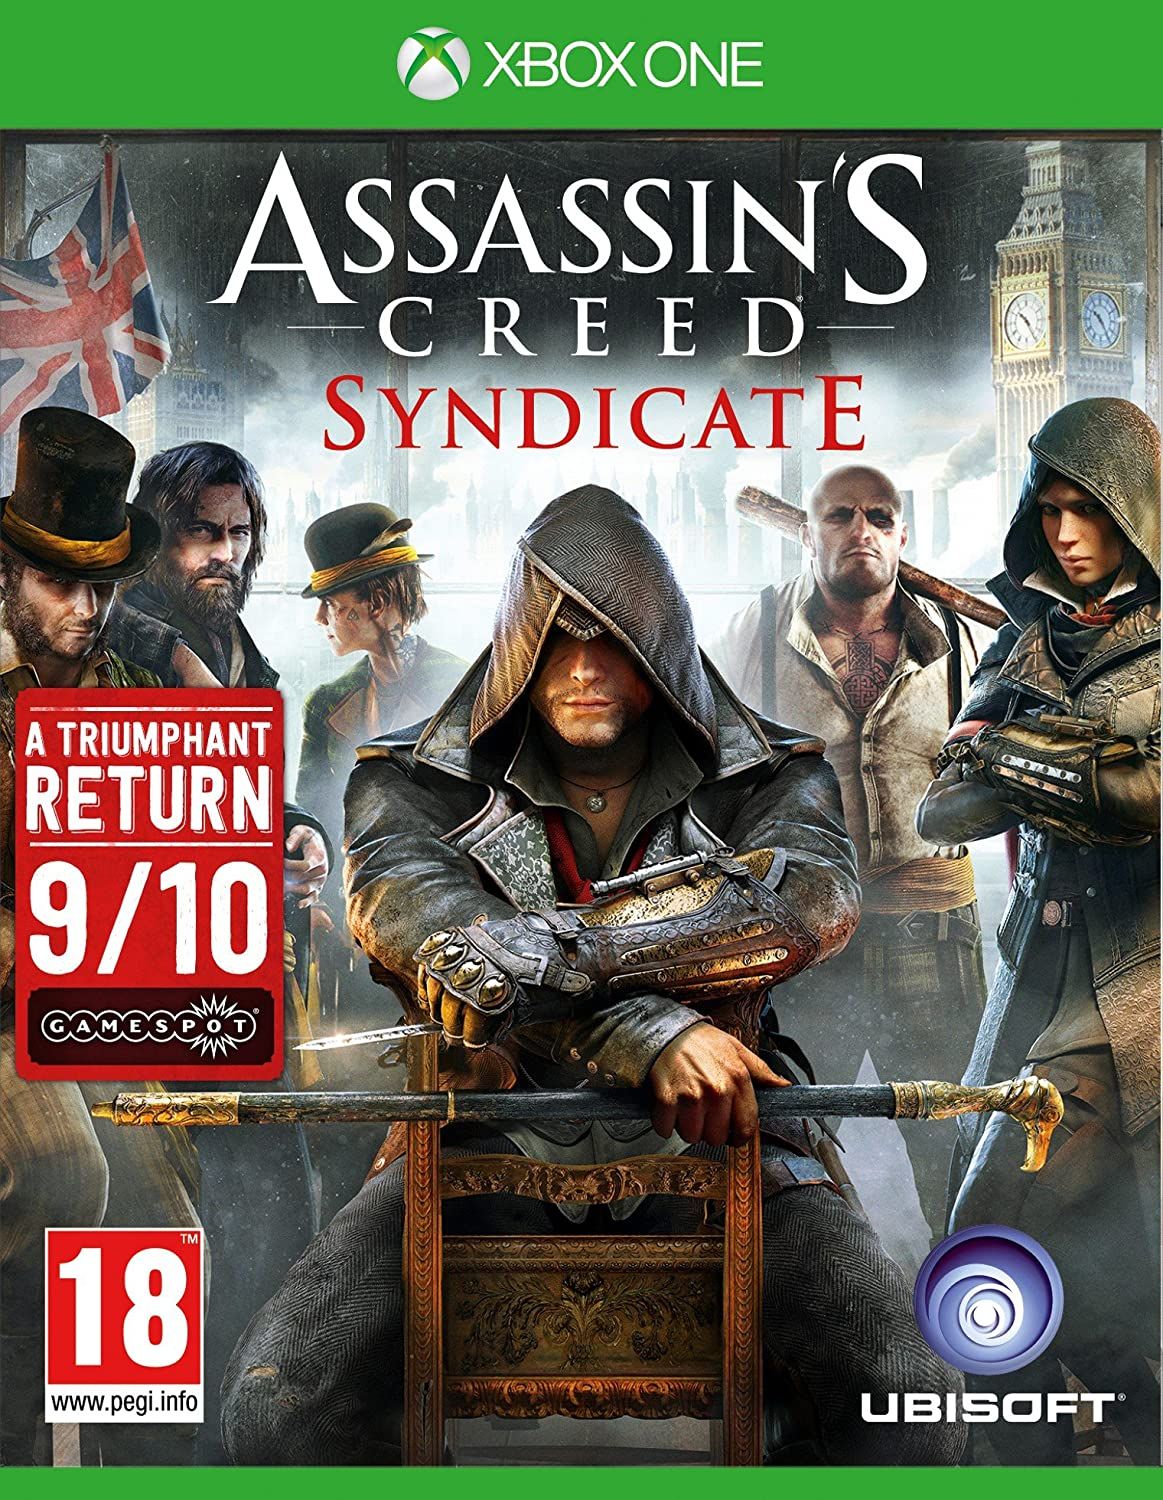 Assassin’s Creed download the new version